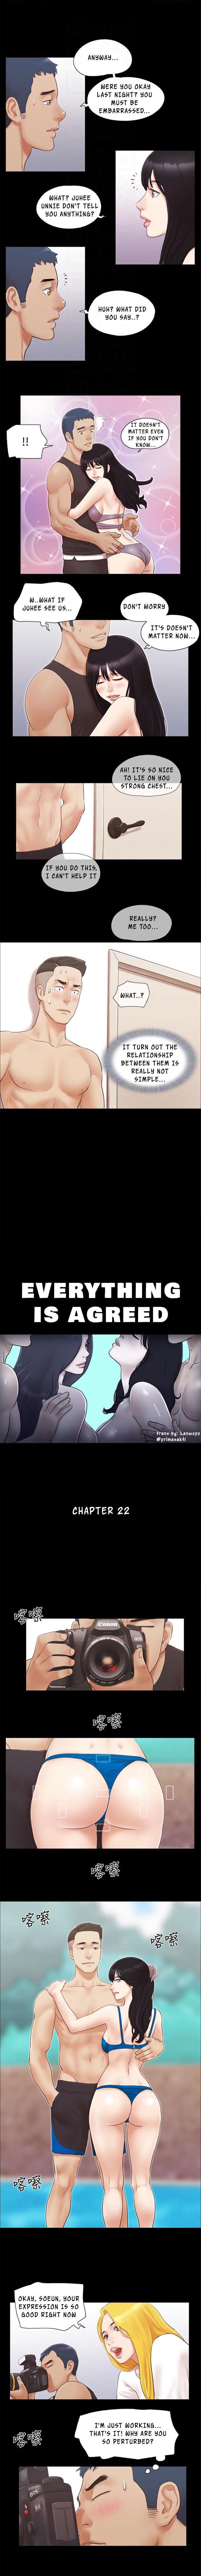 Everything Is Agreed image